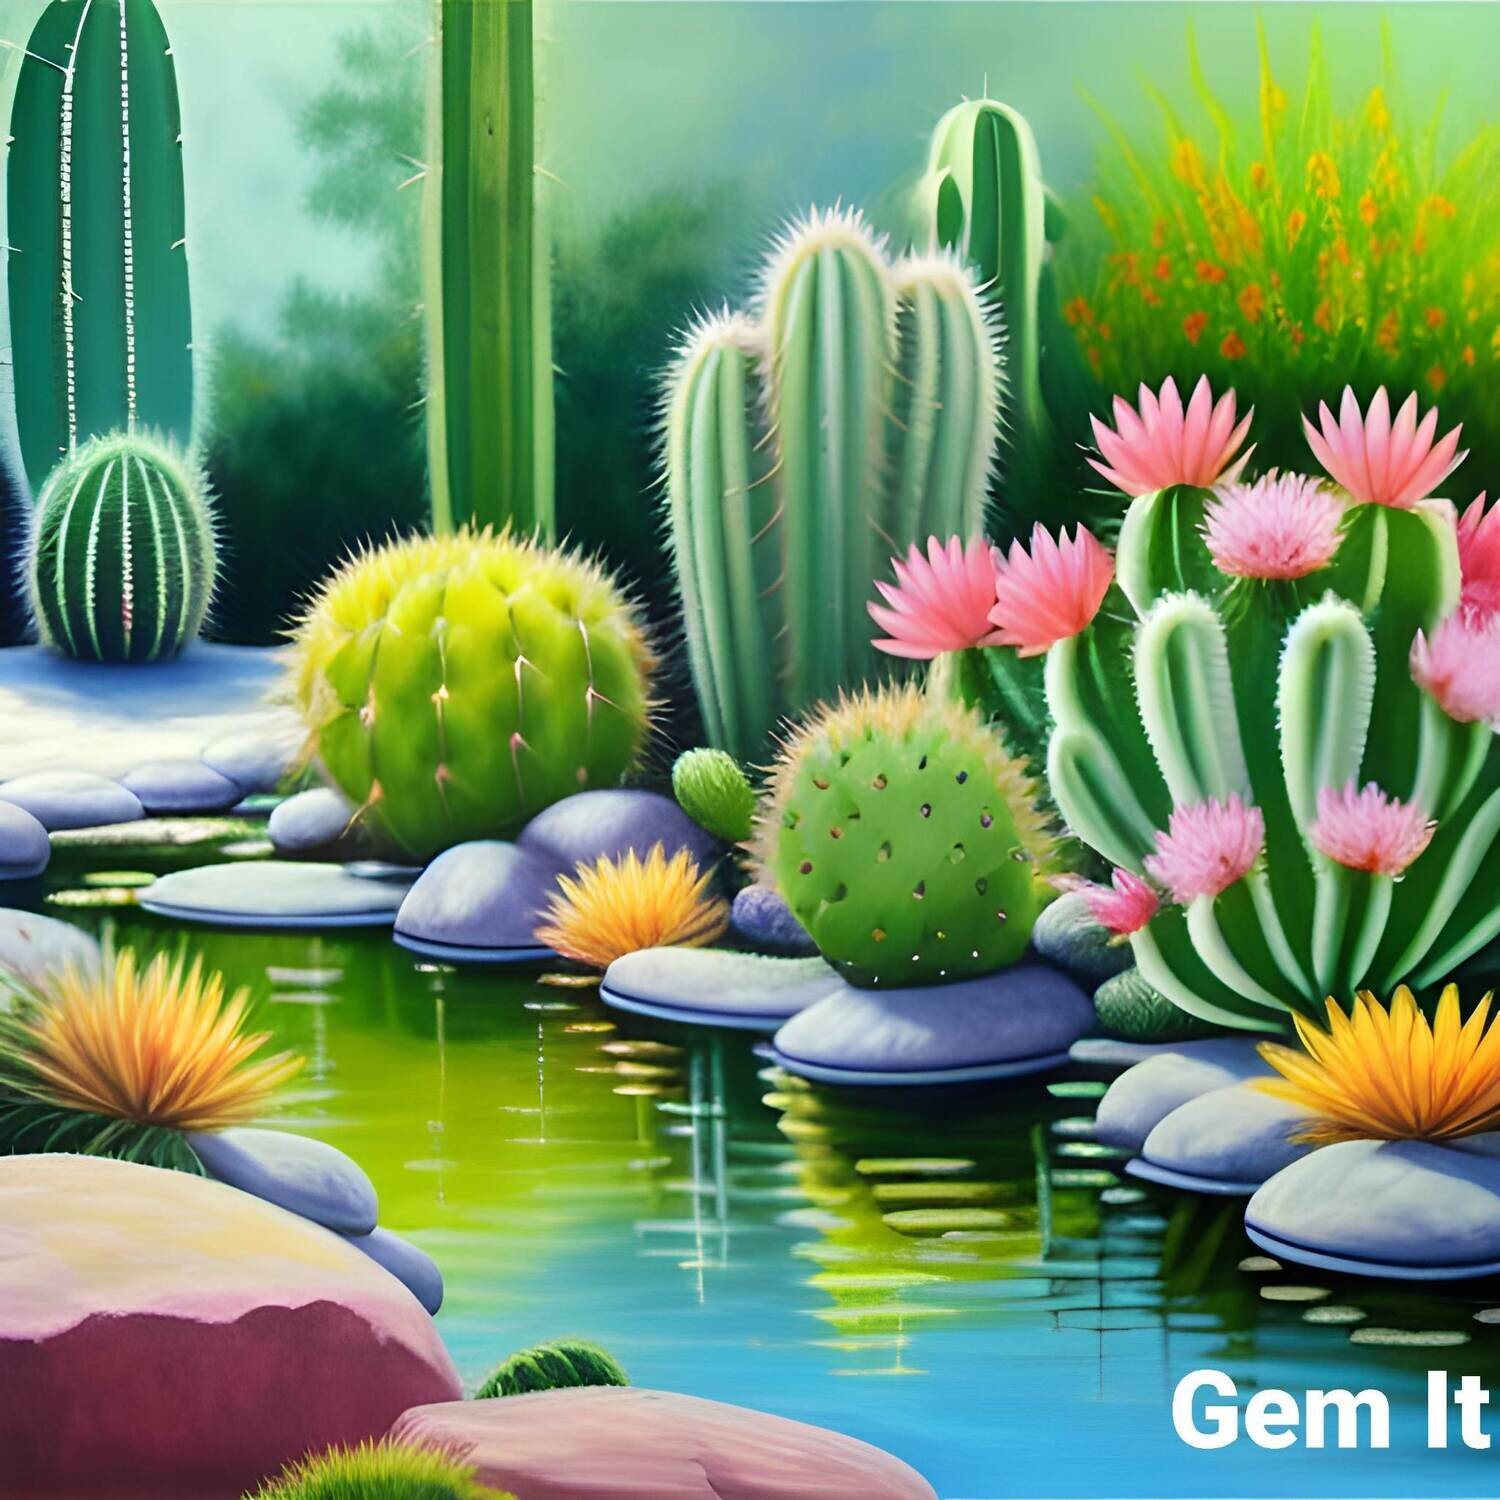 Cactus Garden 3 - Full Drill Diamond Painting - Specially ordered for you. Delivery is approximately 4 - 6 weeks.